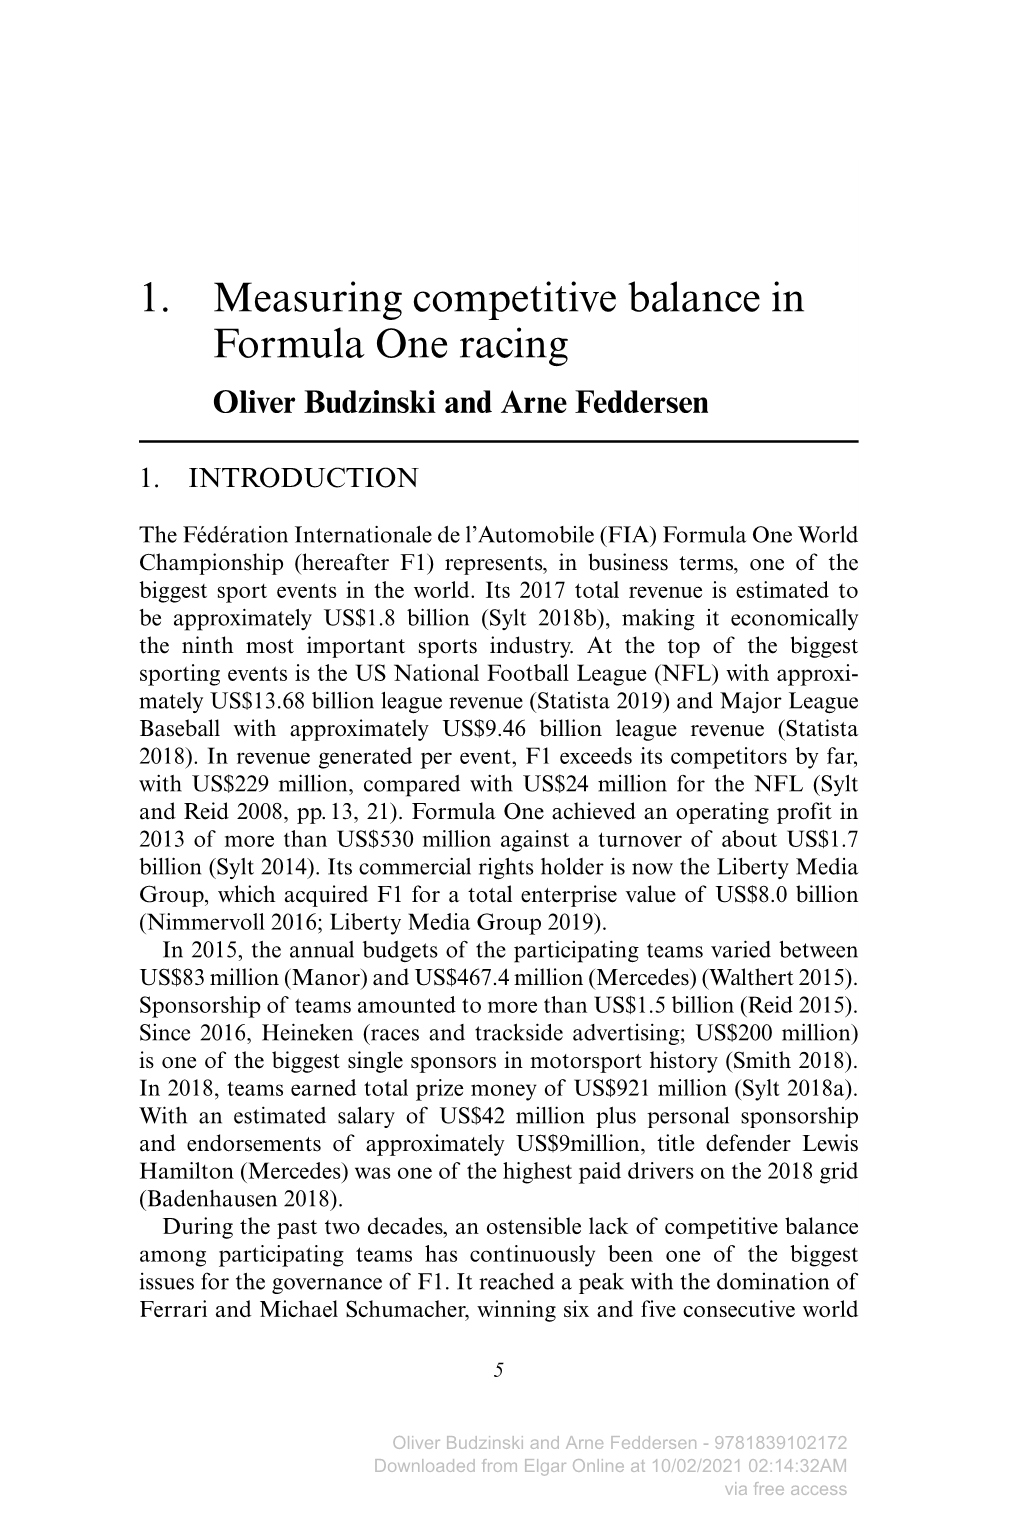 1. Measuring Competitive Balance in Formula One Racing